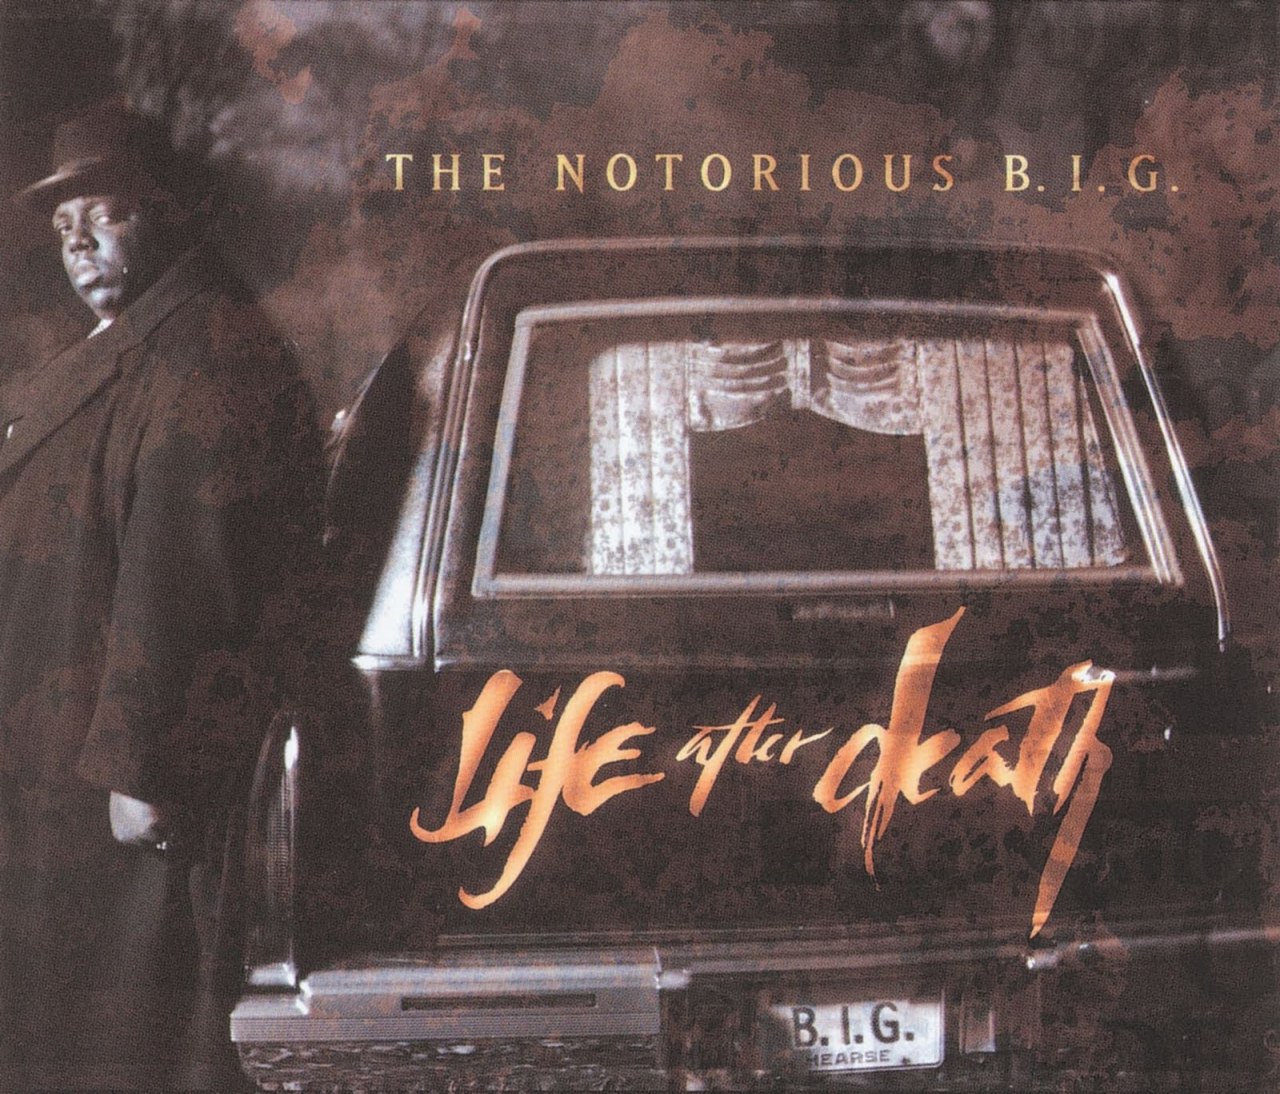 BACK IN THE DAY |3/25/97| The Notorious B.I.G. released his second and final album,